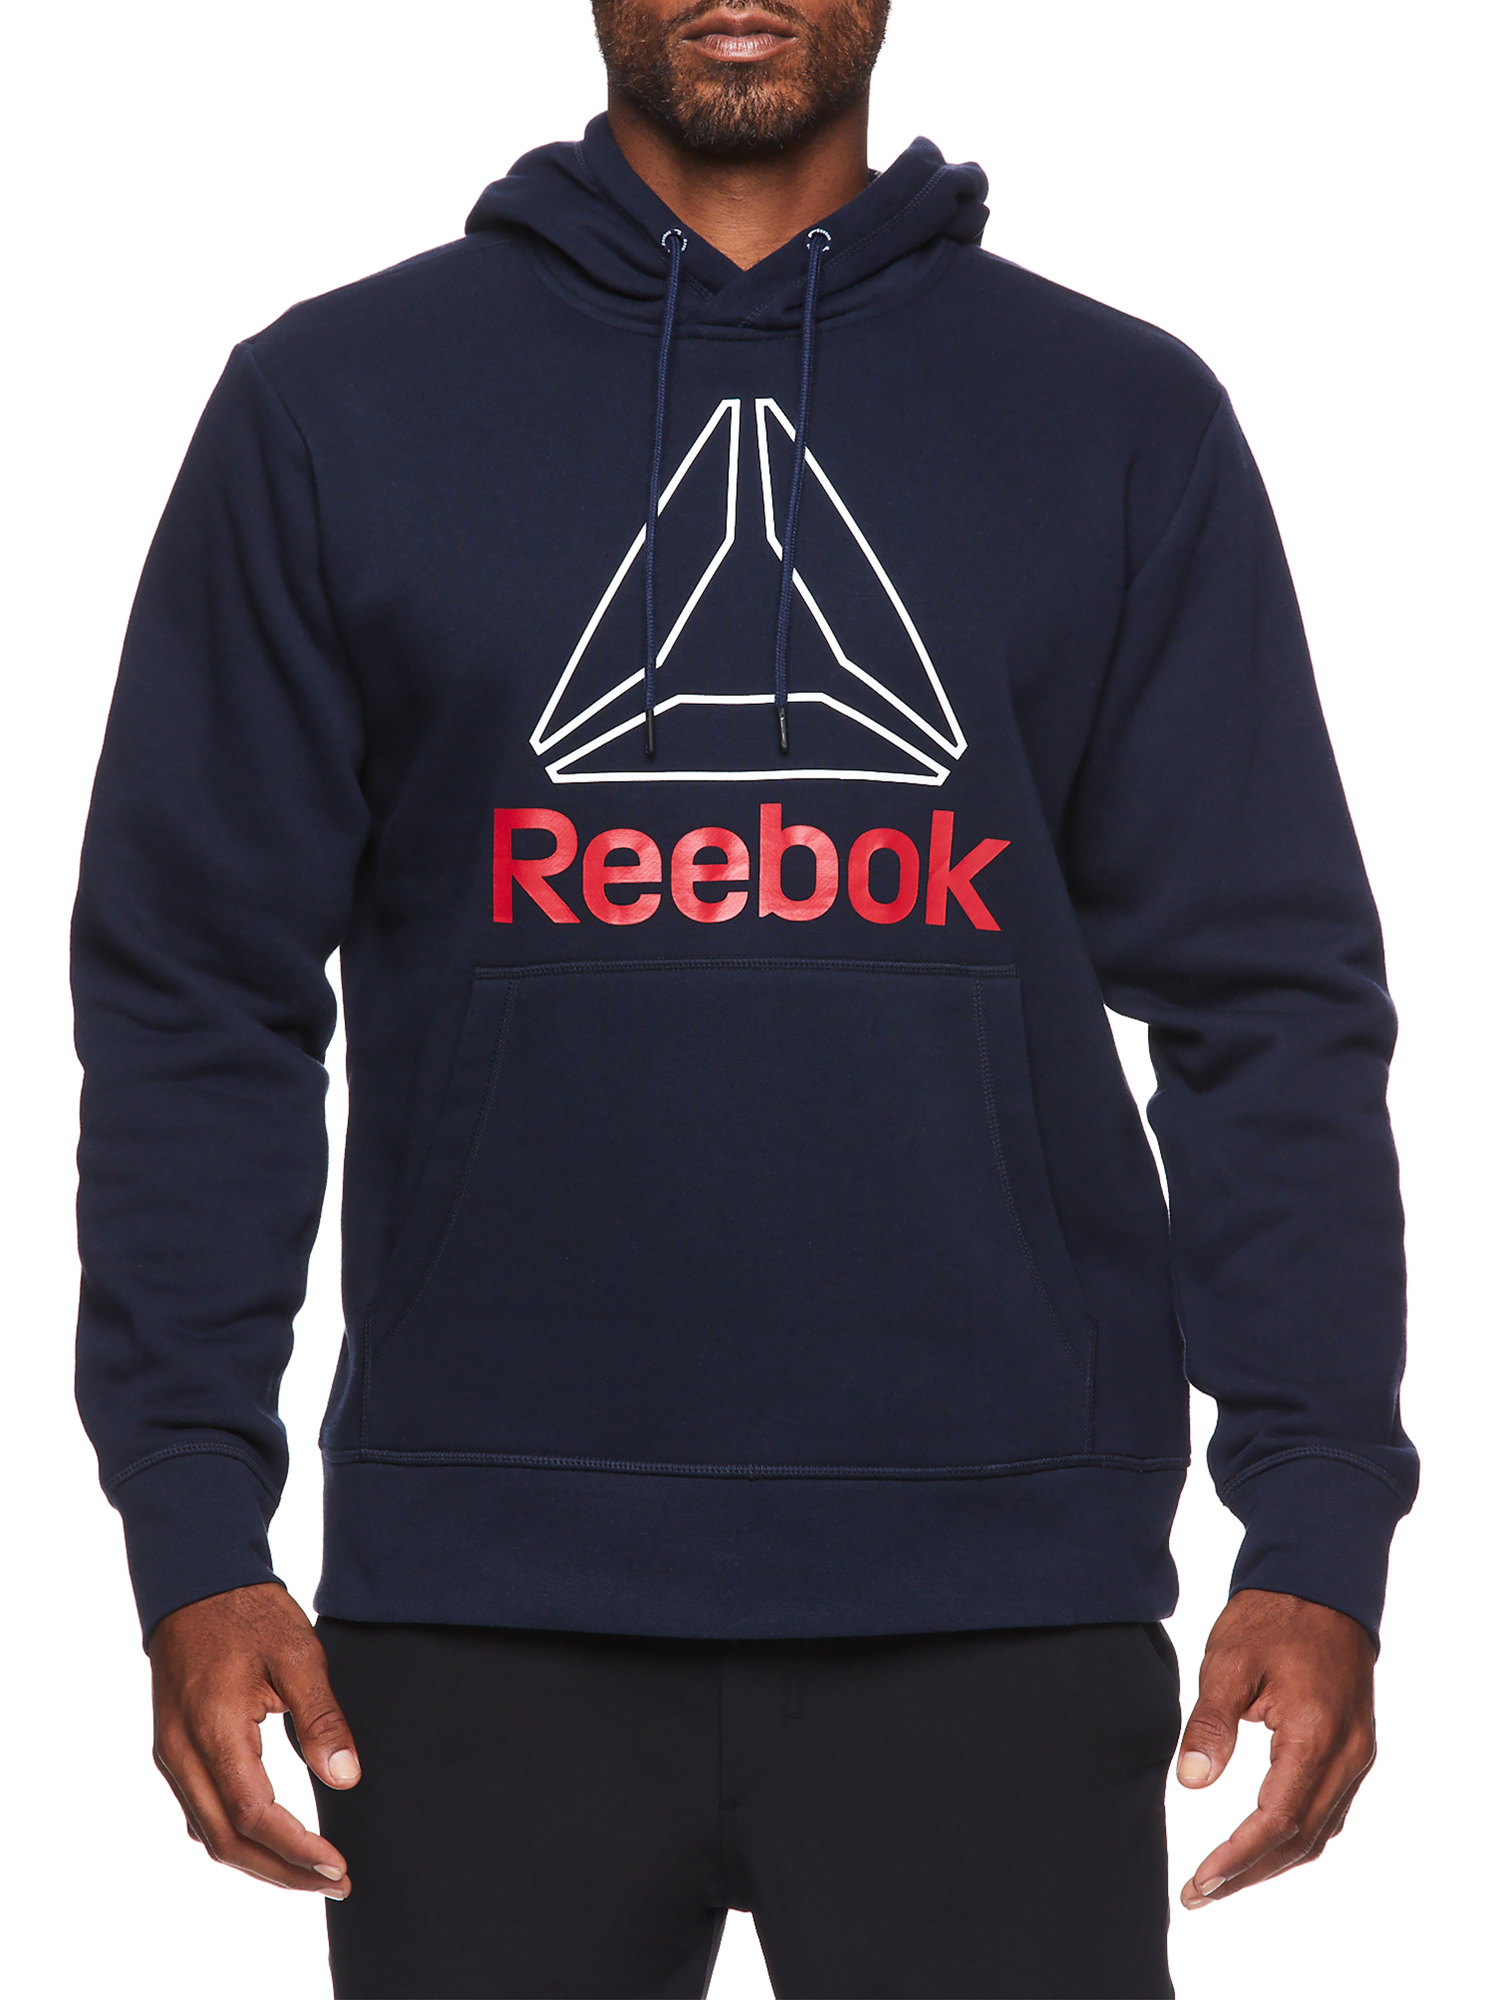 Reebok Mens and Big Mens Active Pullover Fleece Hoodie, Up to 3XL - image 1 of 5